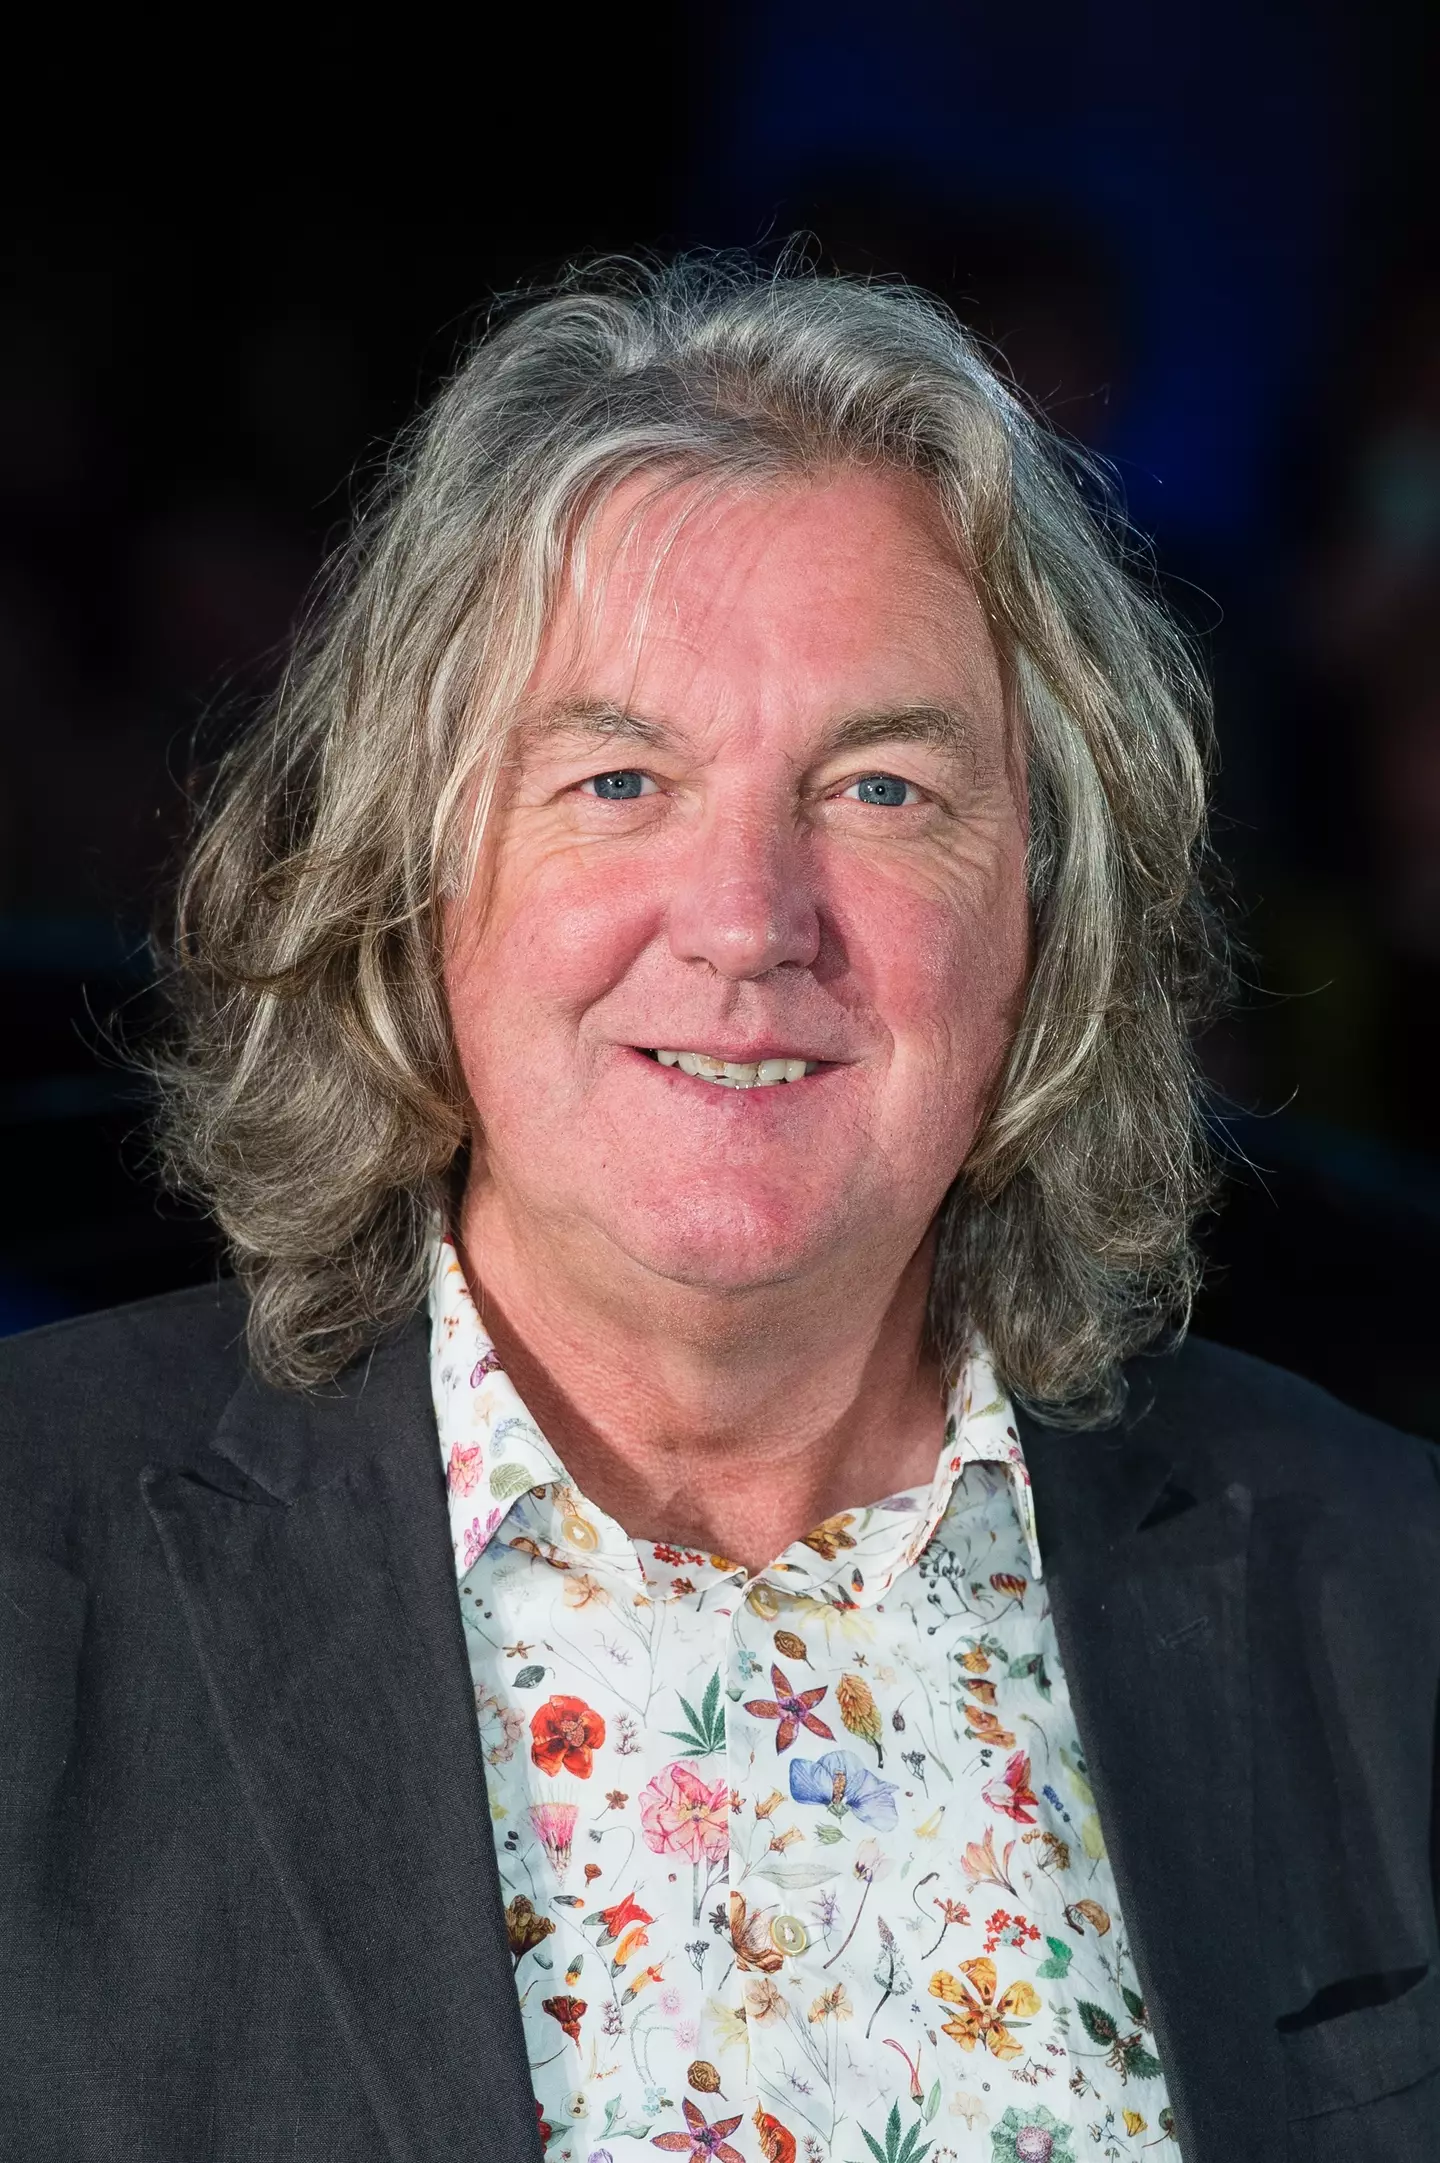 James May will not return to The Grand Tour. (Jeff Spicer/WireImage)